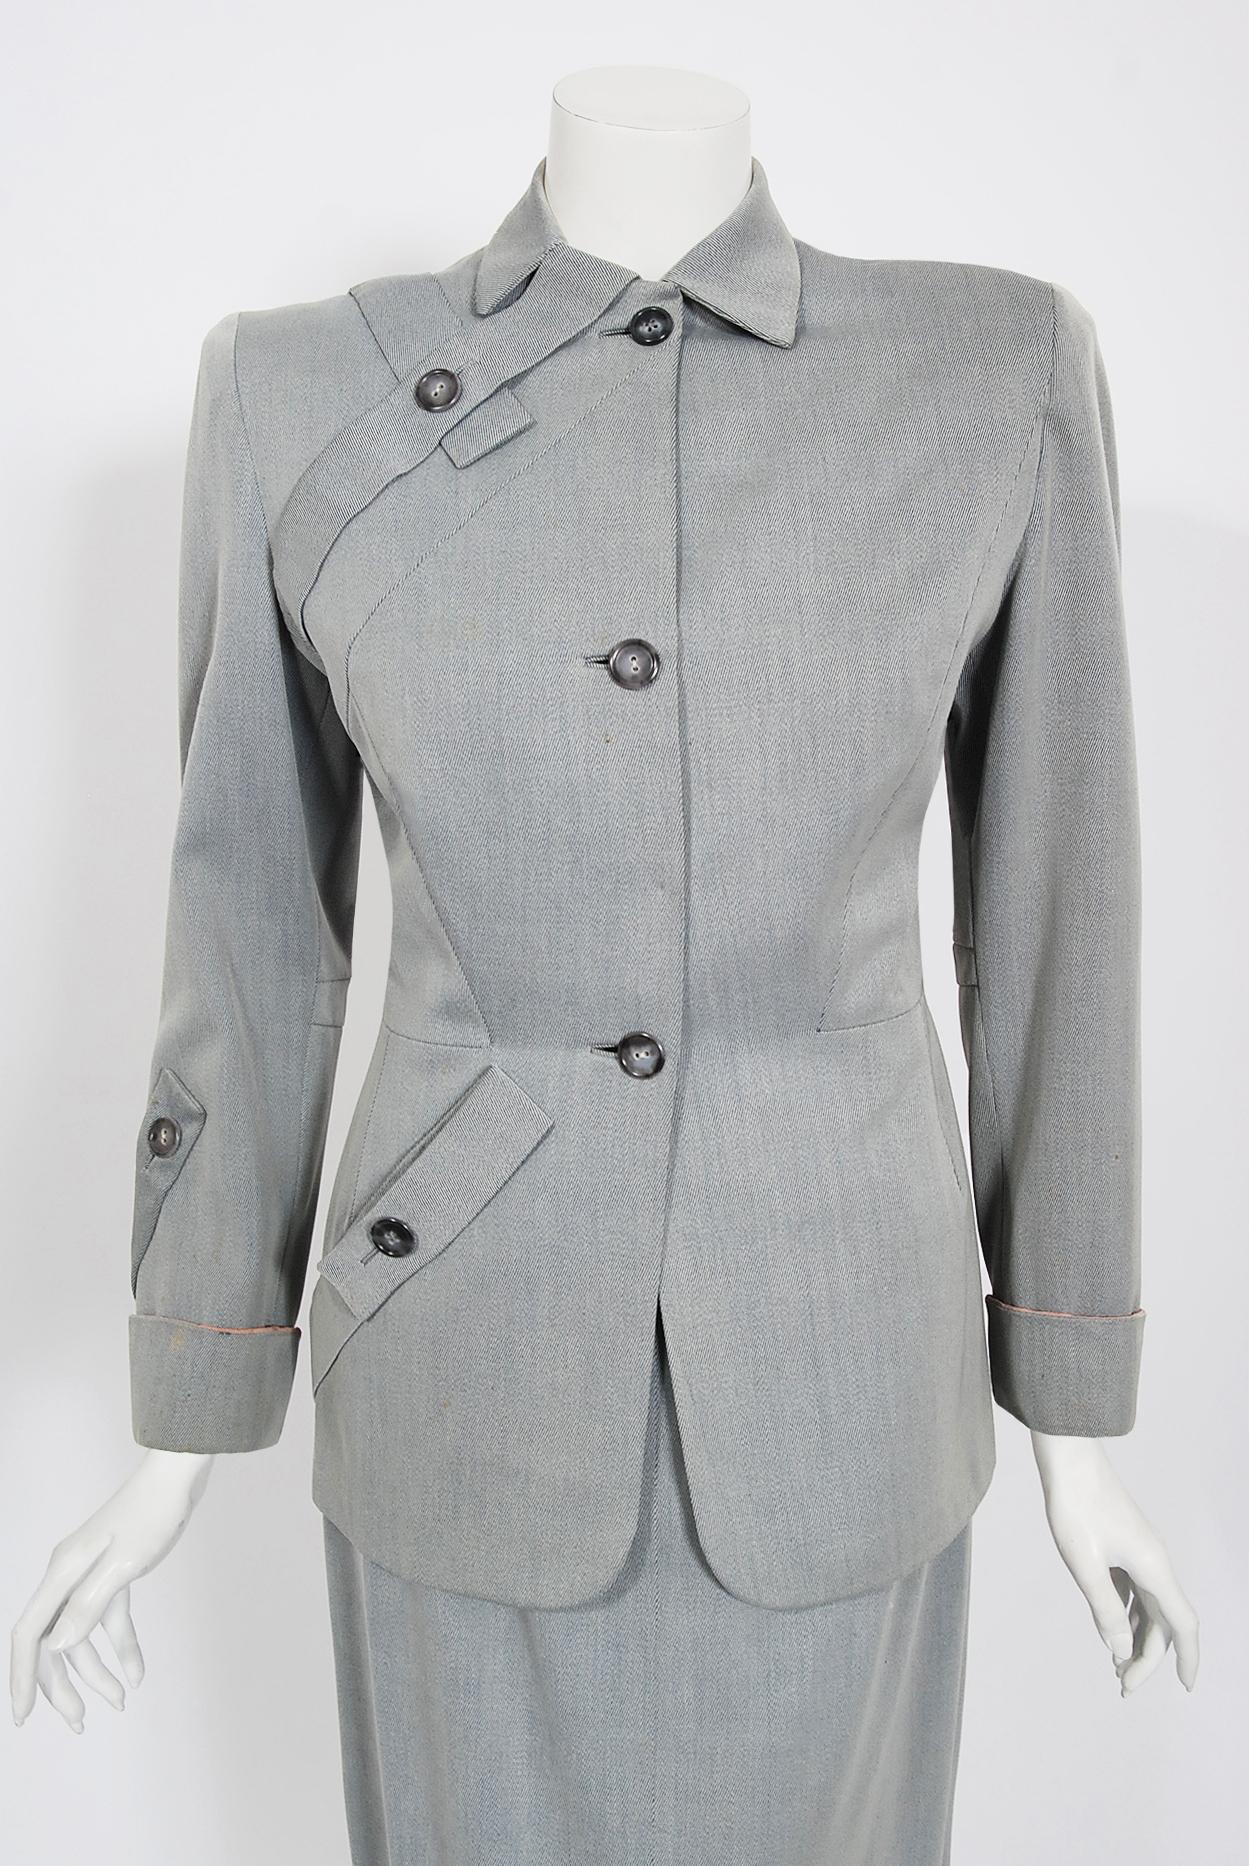 Spectacular Gilbert Adrian two-piece skirt suit dating back to the mid 1940's. He created the signature looks for the great Hollywood divas such as Garbo, Shearer, Crawford, Garland, and Harlow. Adrian took into account the actress as well as the